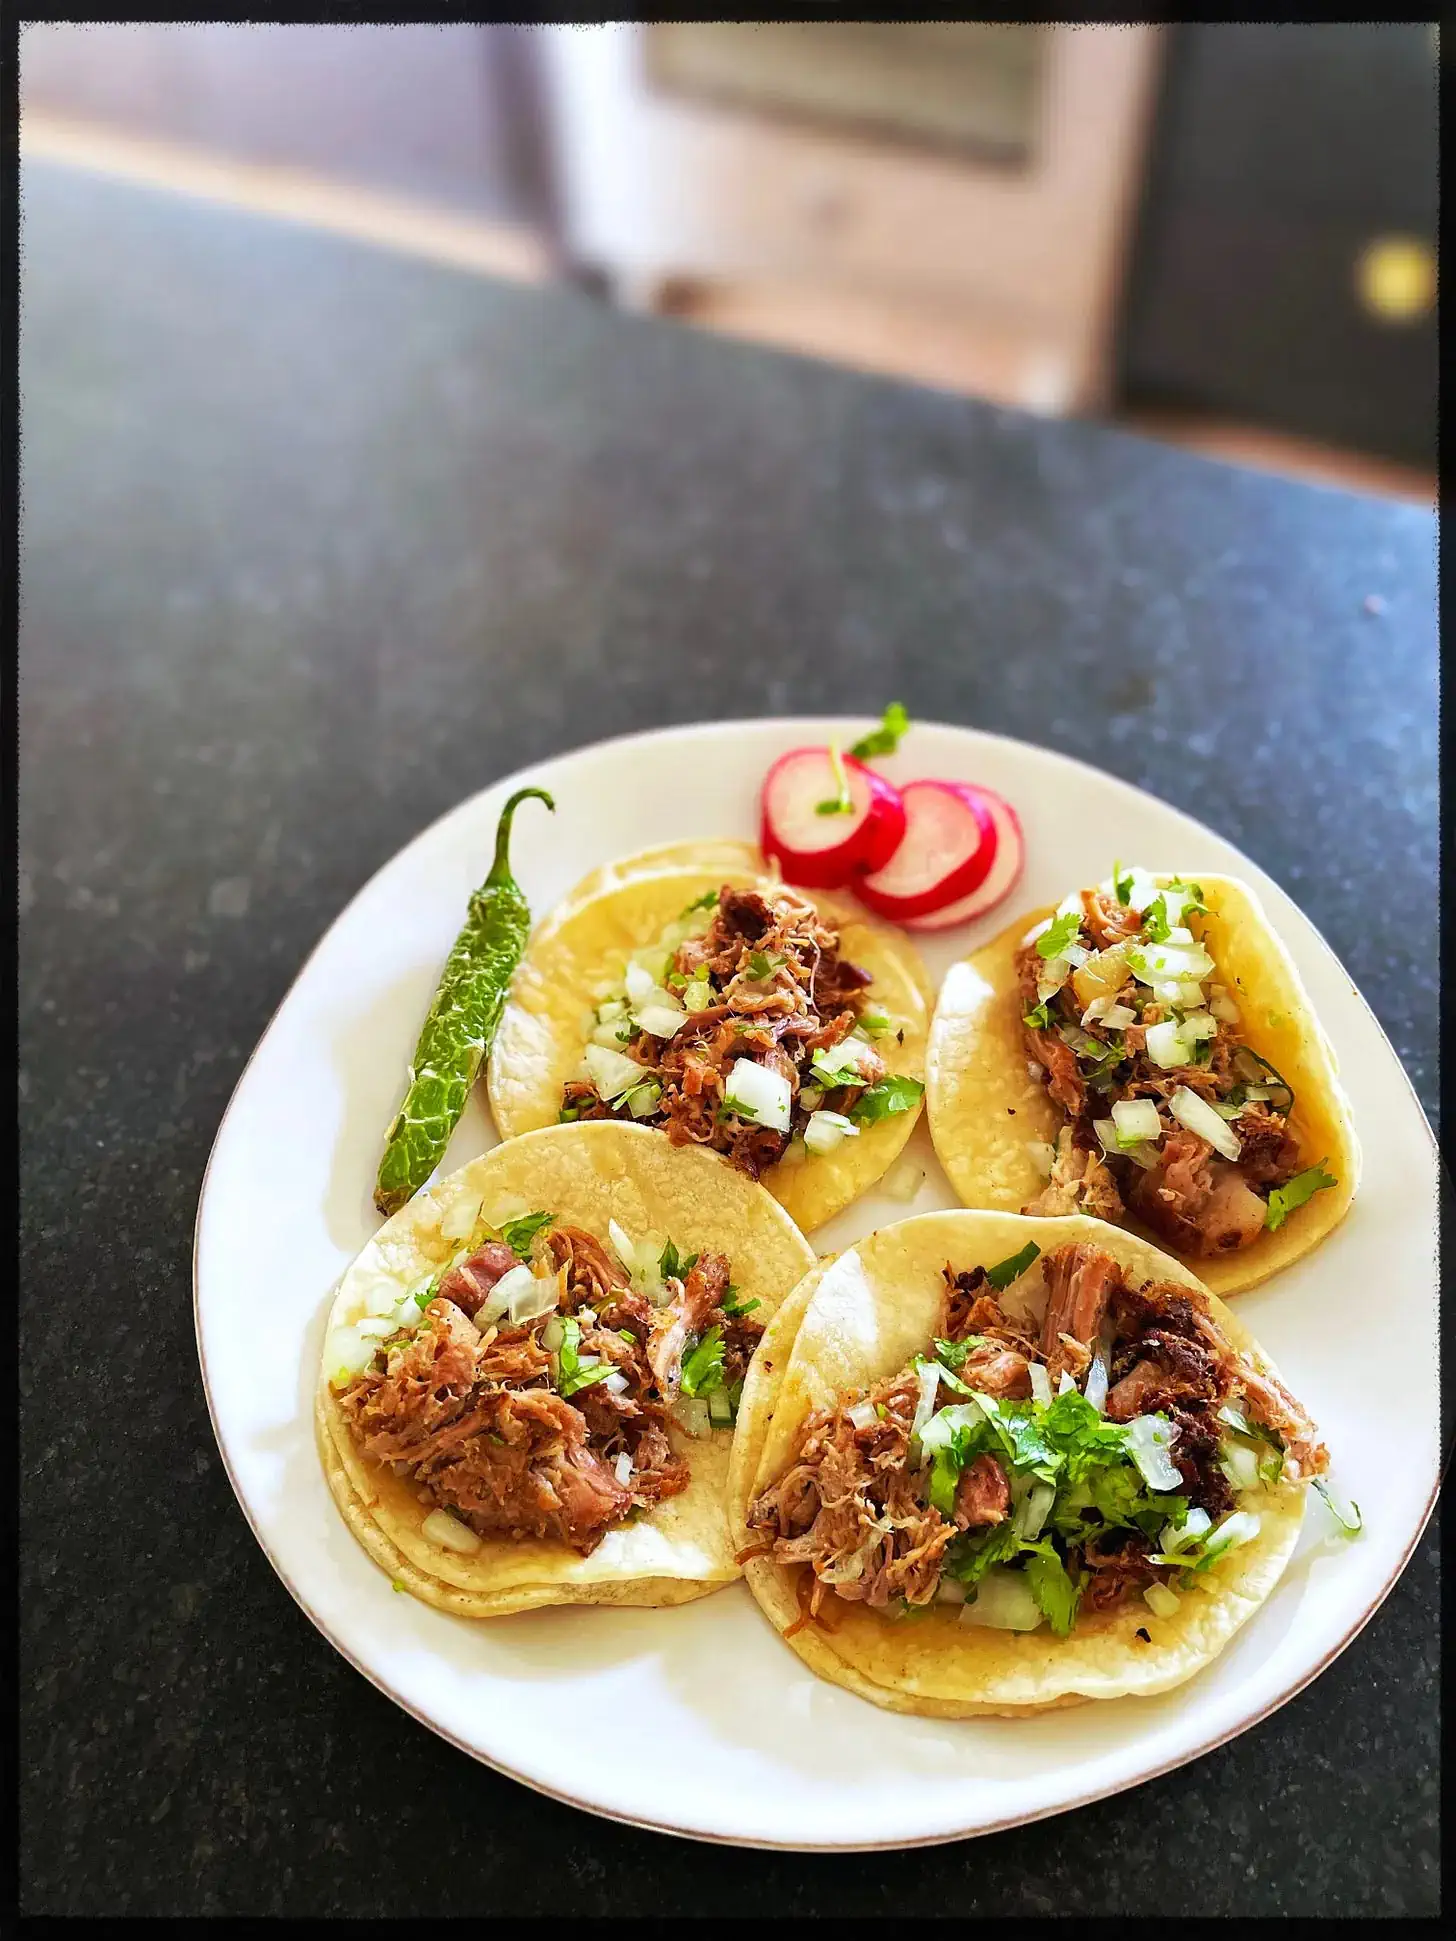 Four tacos on a plate